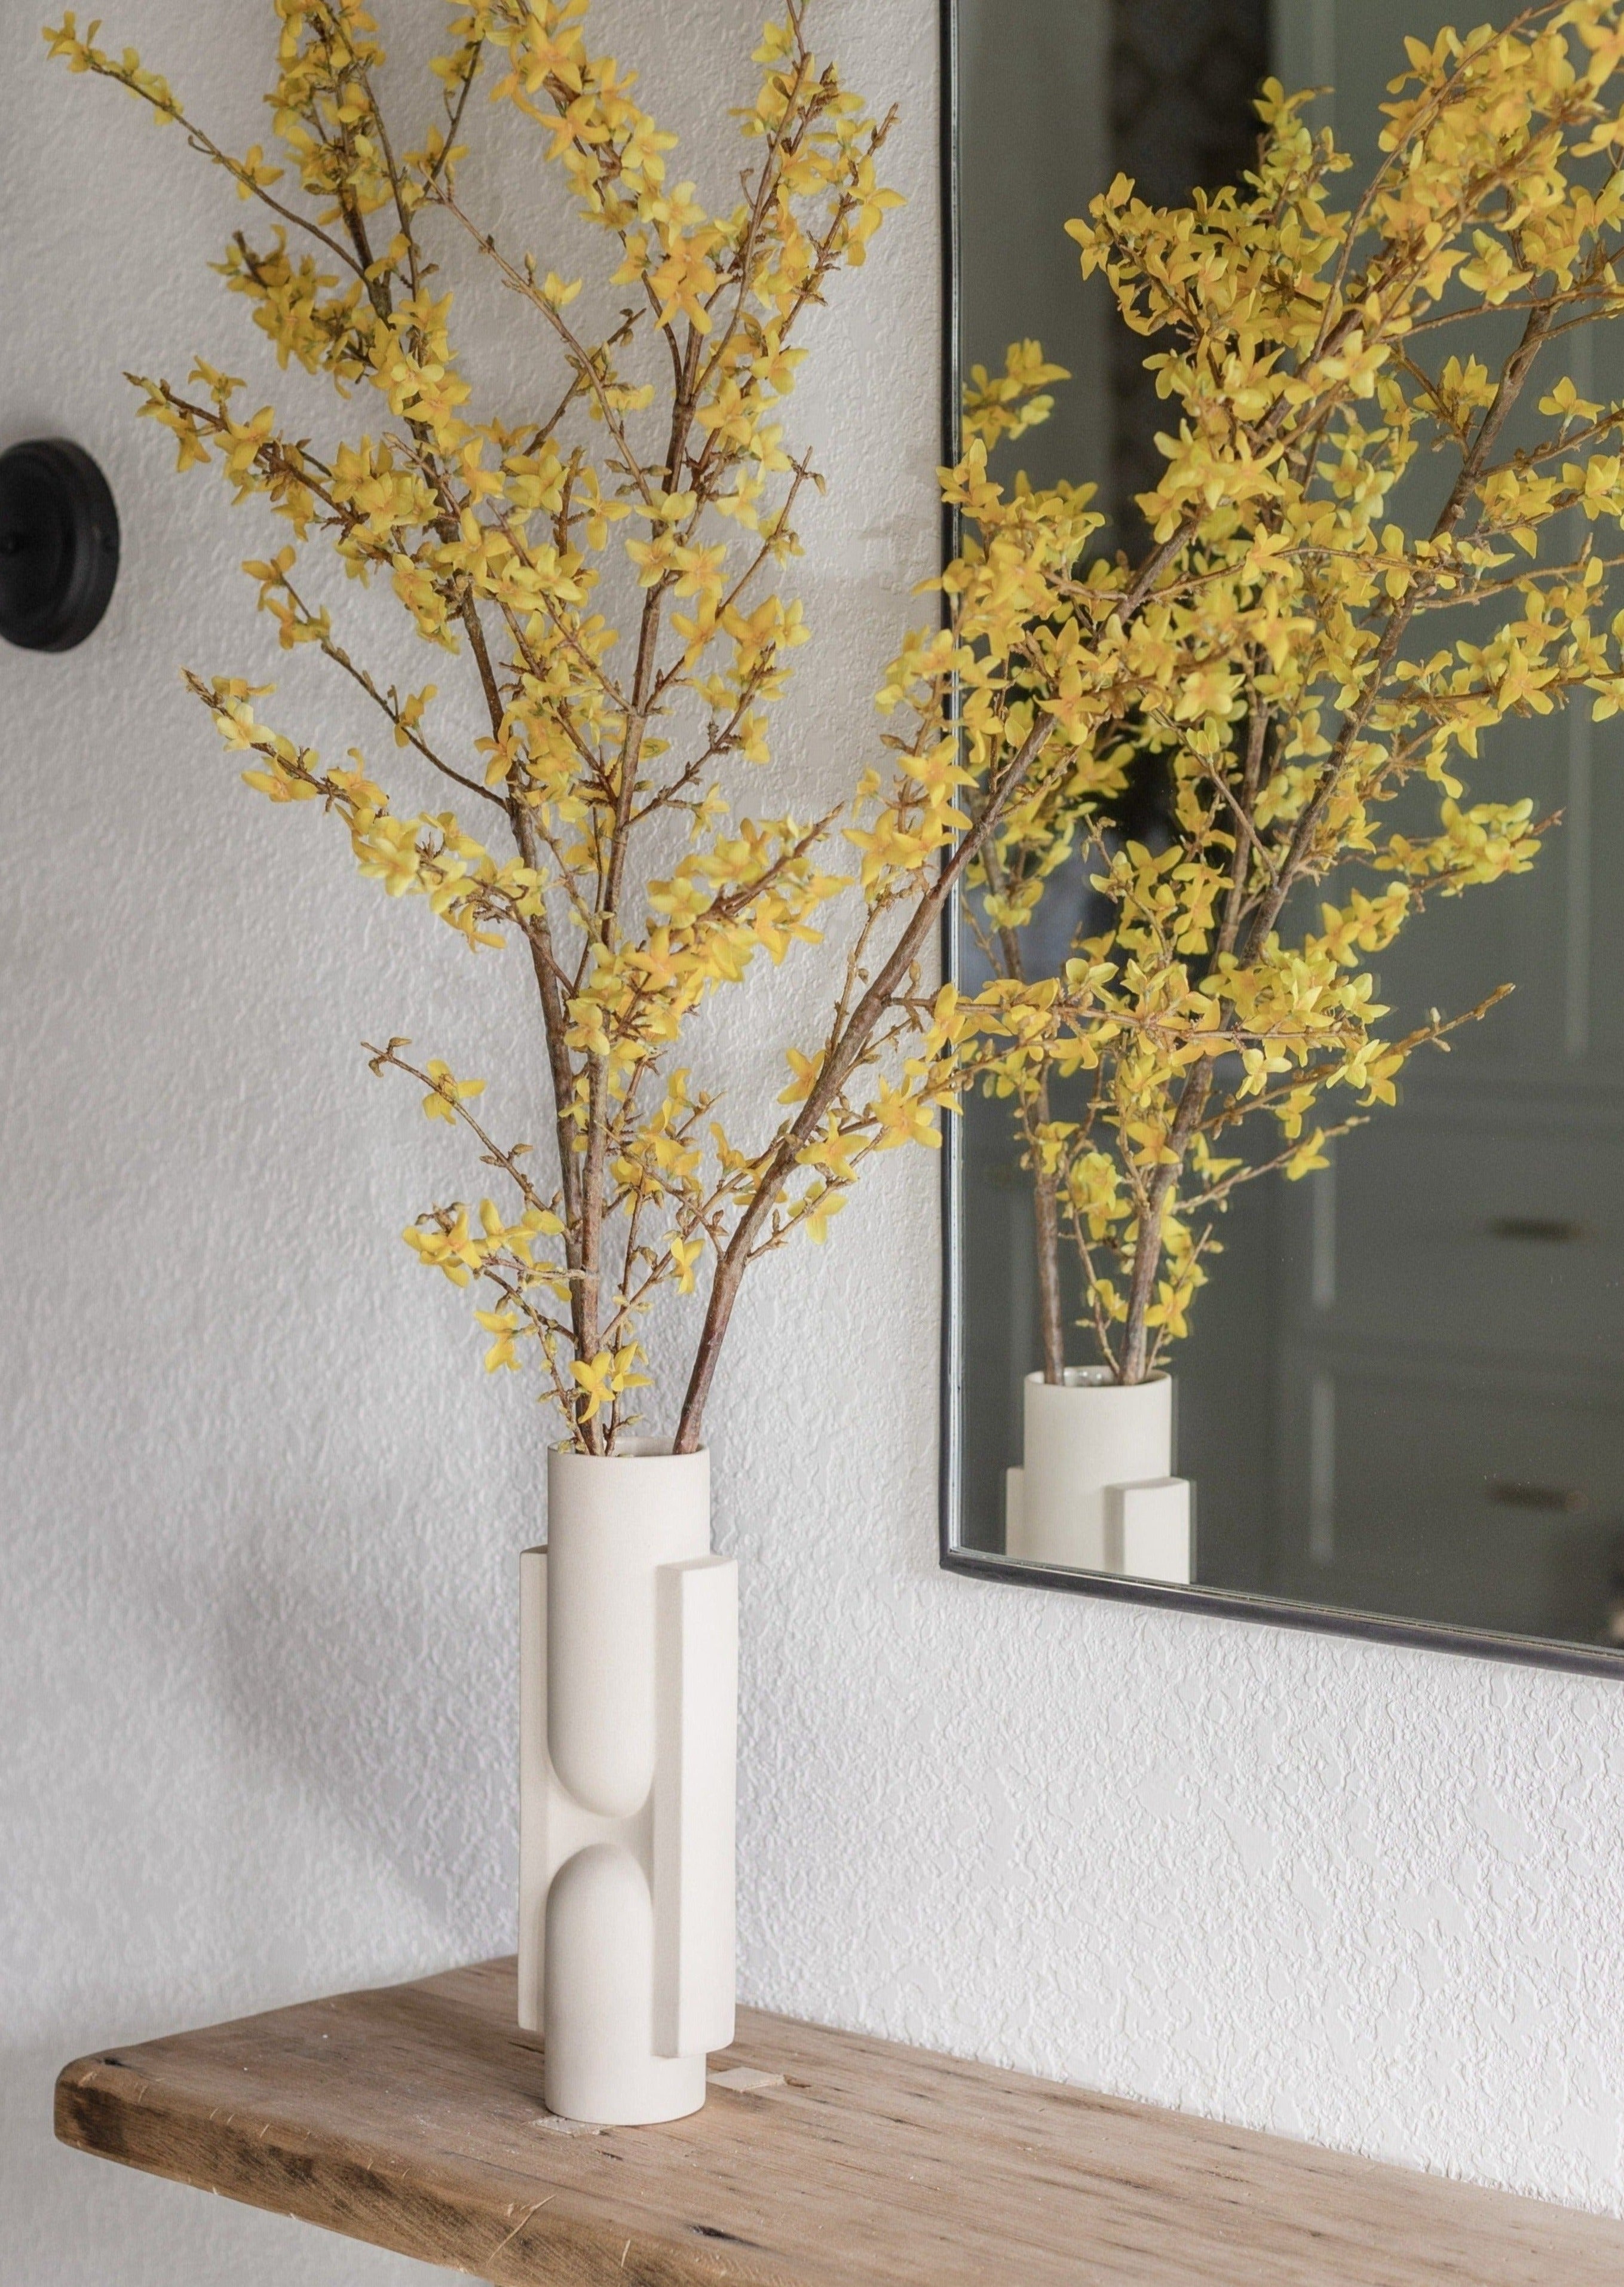 Kala Vase Styled with Faux Forsythia Branches